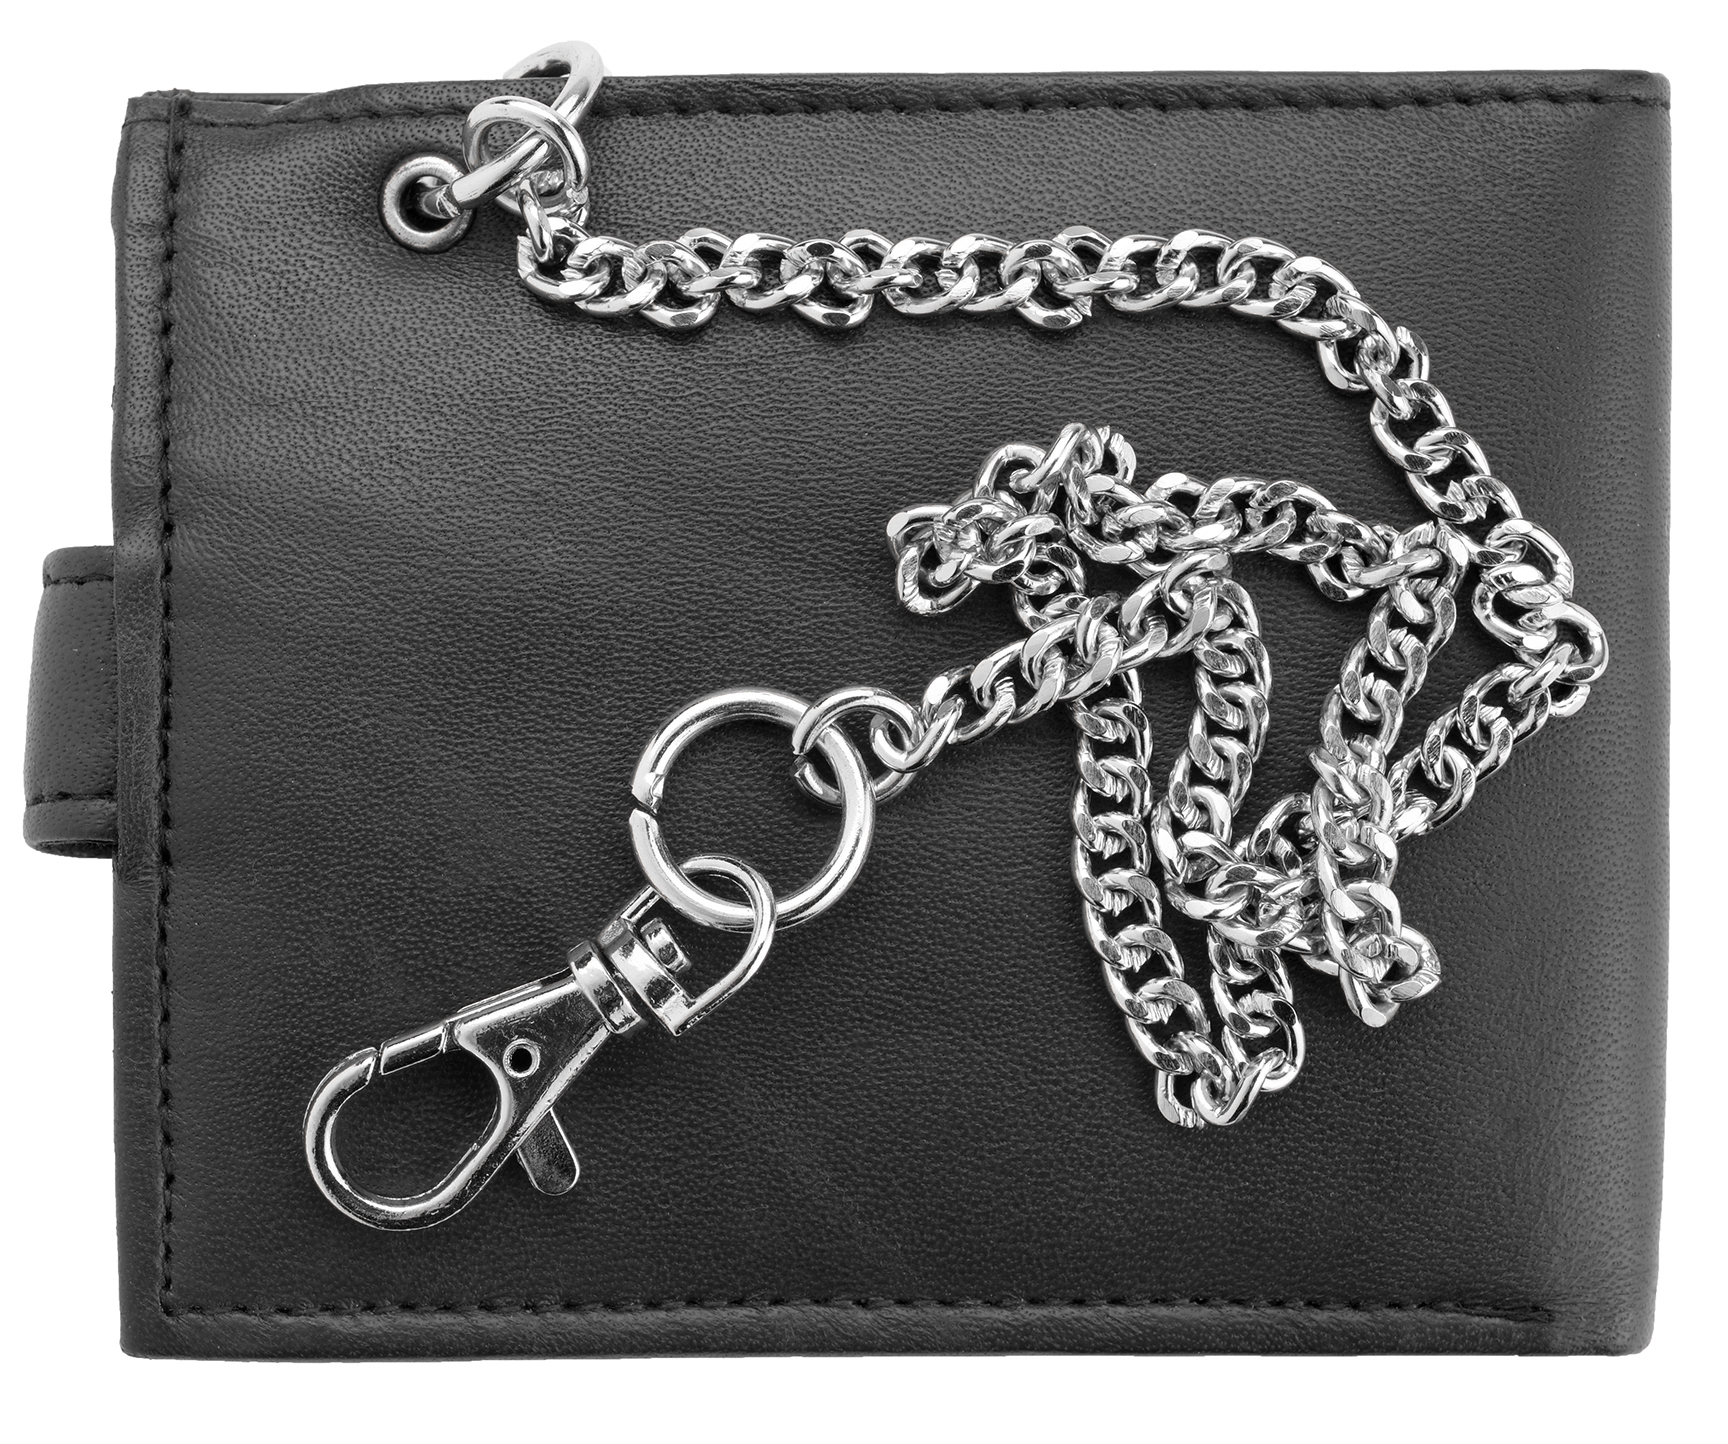 MENS BLACK SOFT SHEEP NAPPA LEATHER WALLET WITH CHANGE SECTION AND CHAIN BNIP 